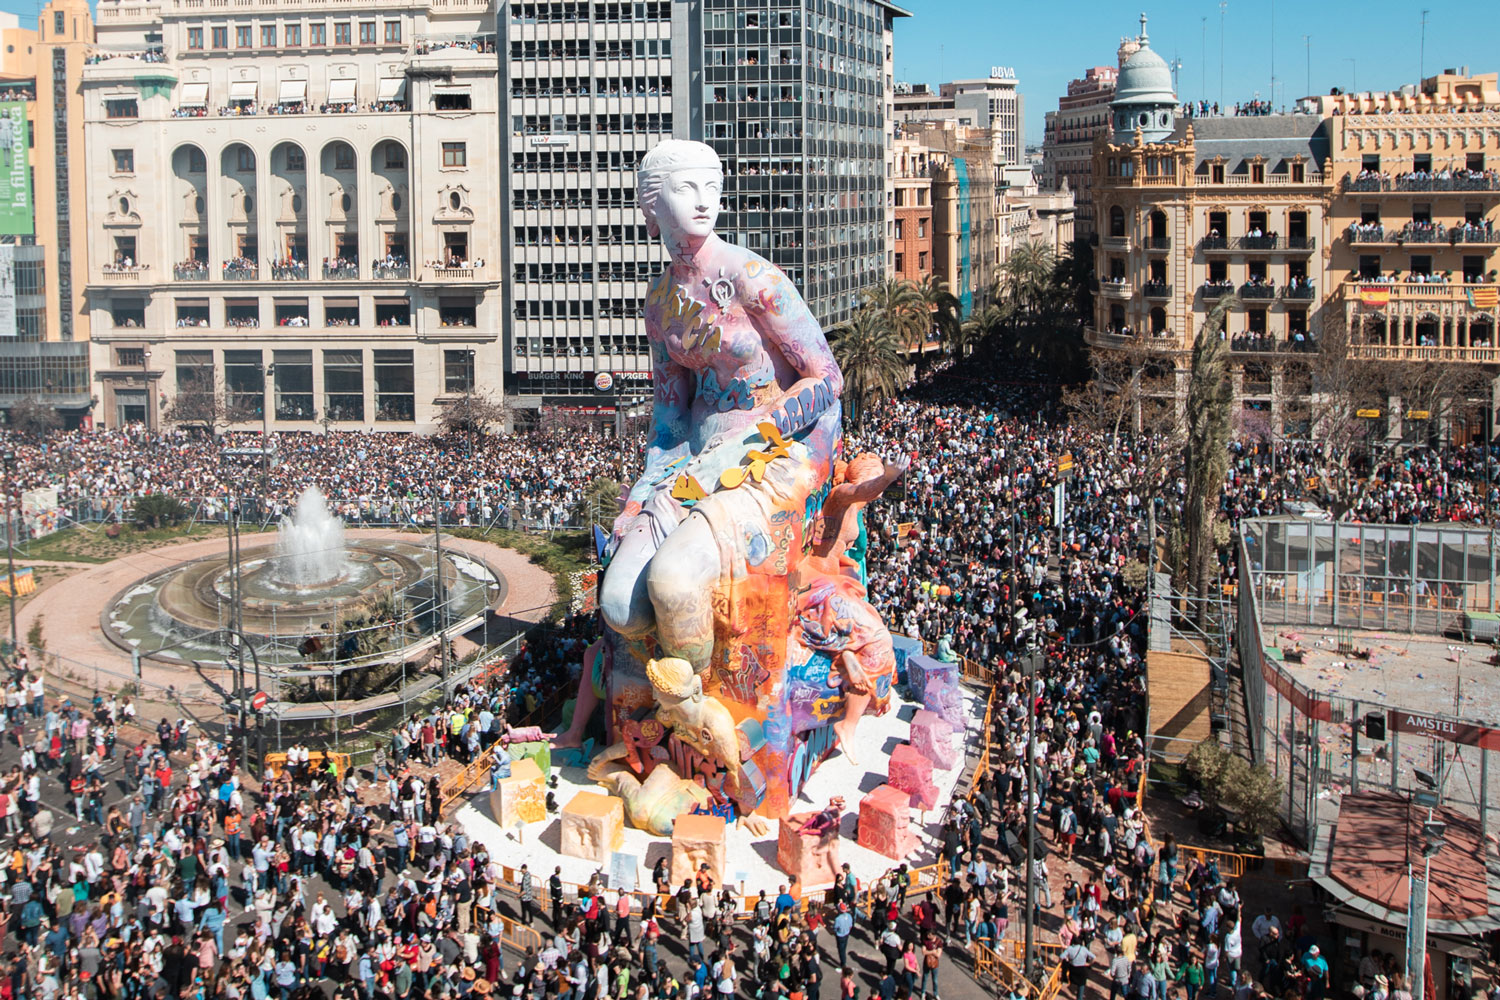 Valencia Fallas A Spectacular Celebration of Art, Fire, and Tradition